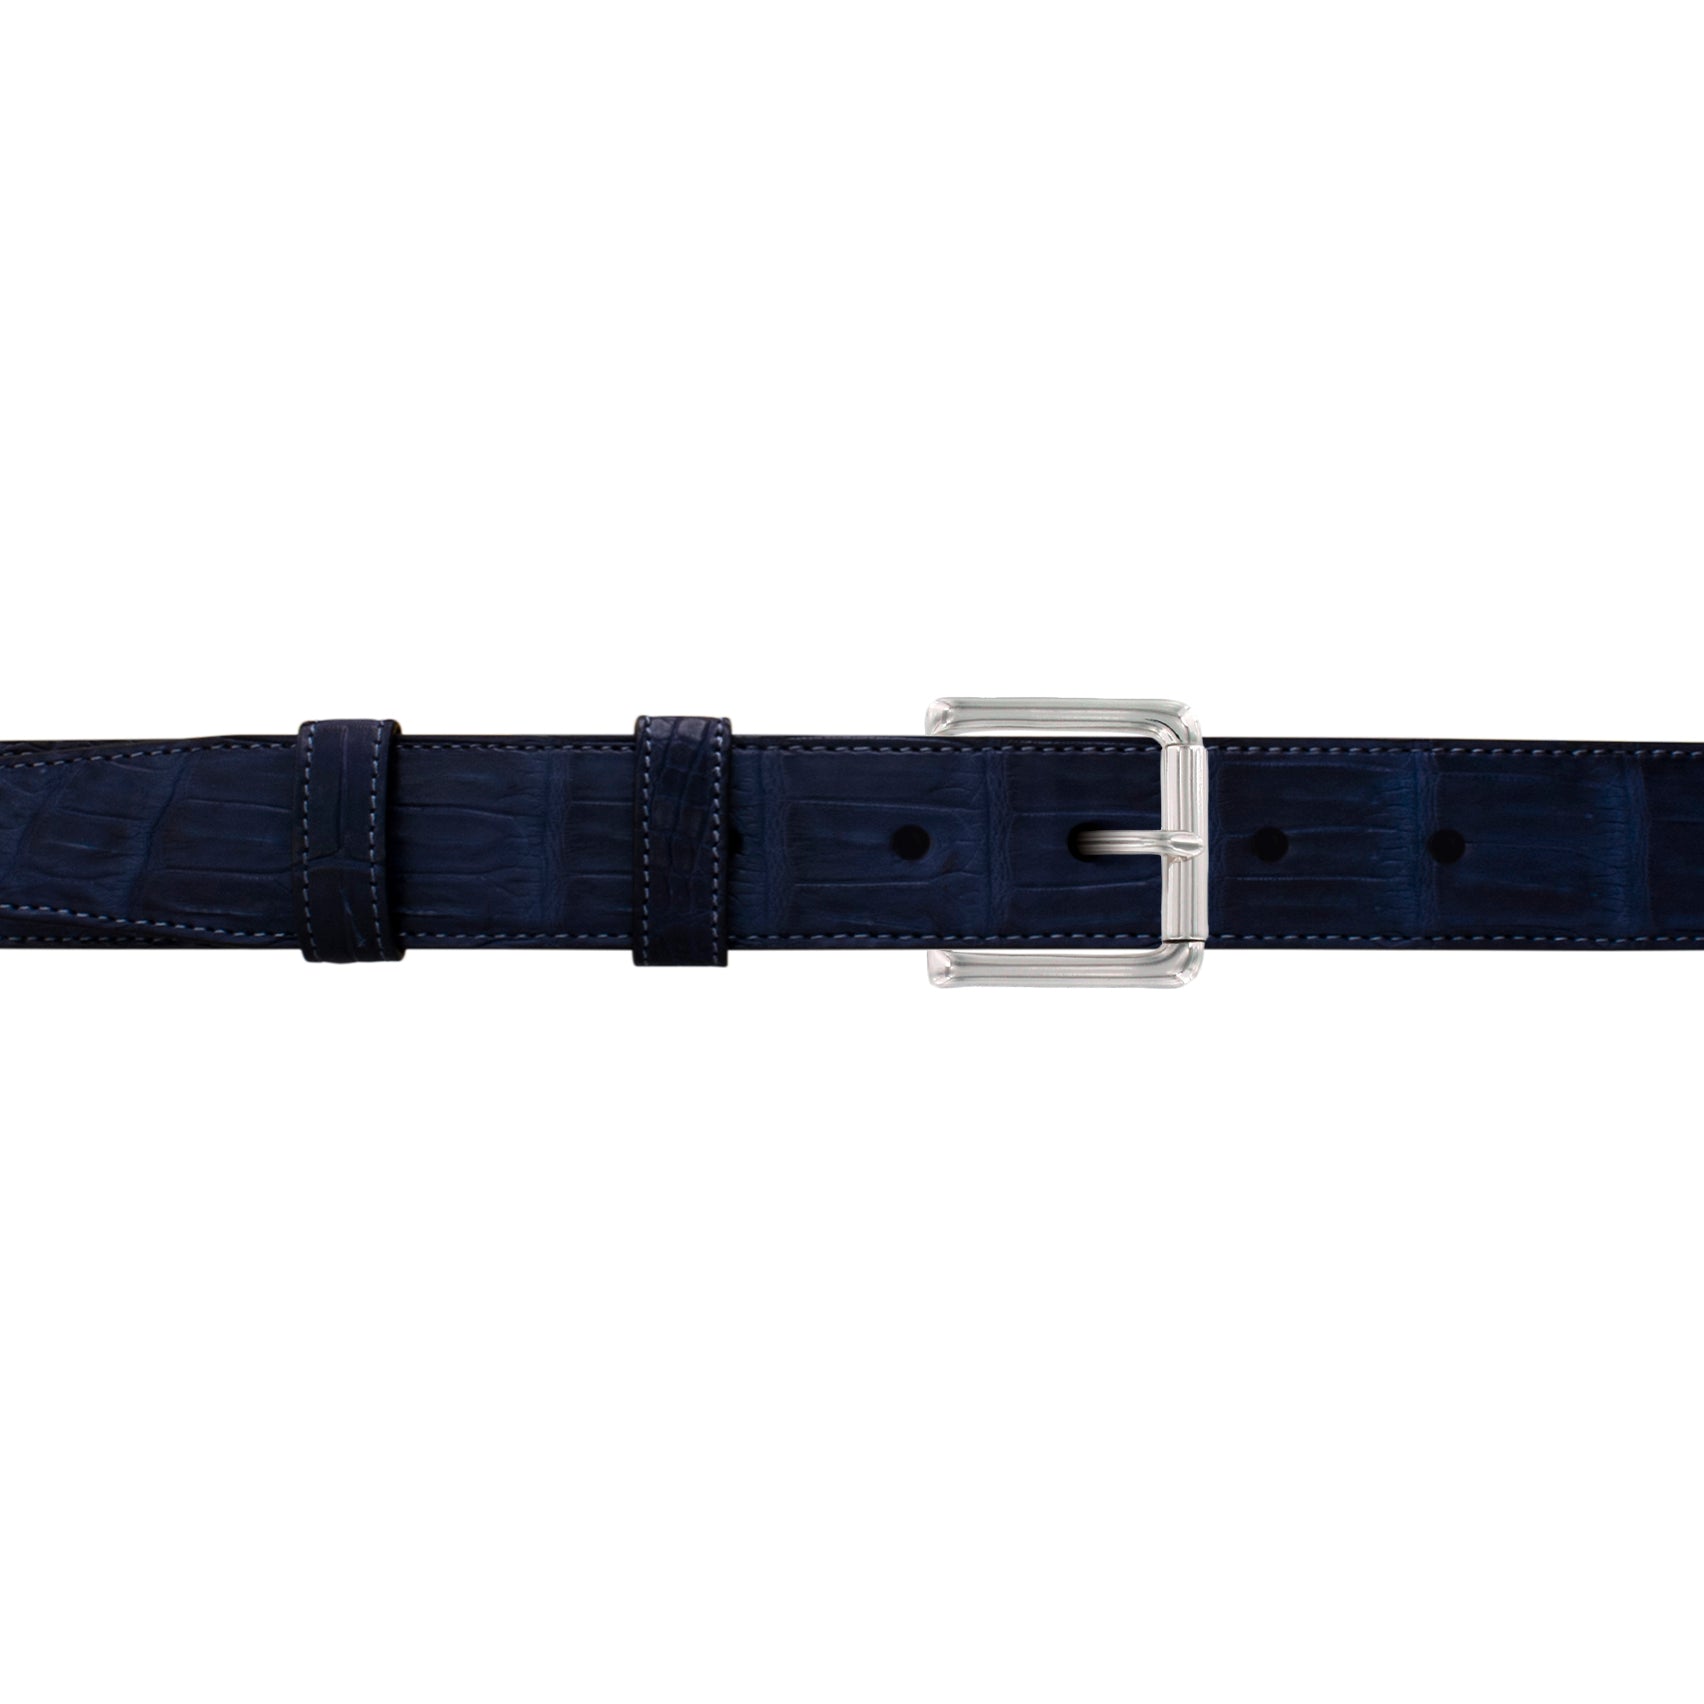 1" Midnight Classic Belt with Denver Casual Buckle in Polished Nickel